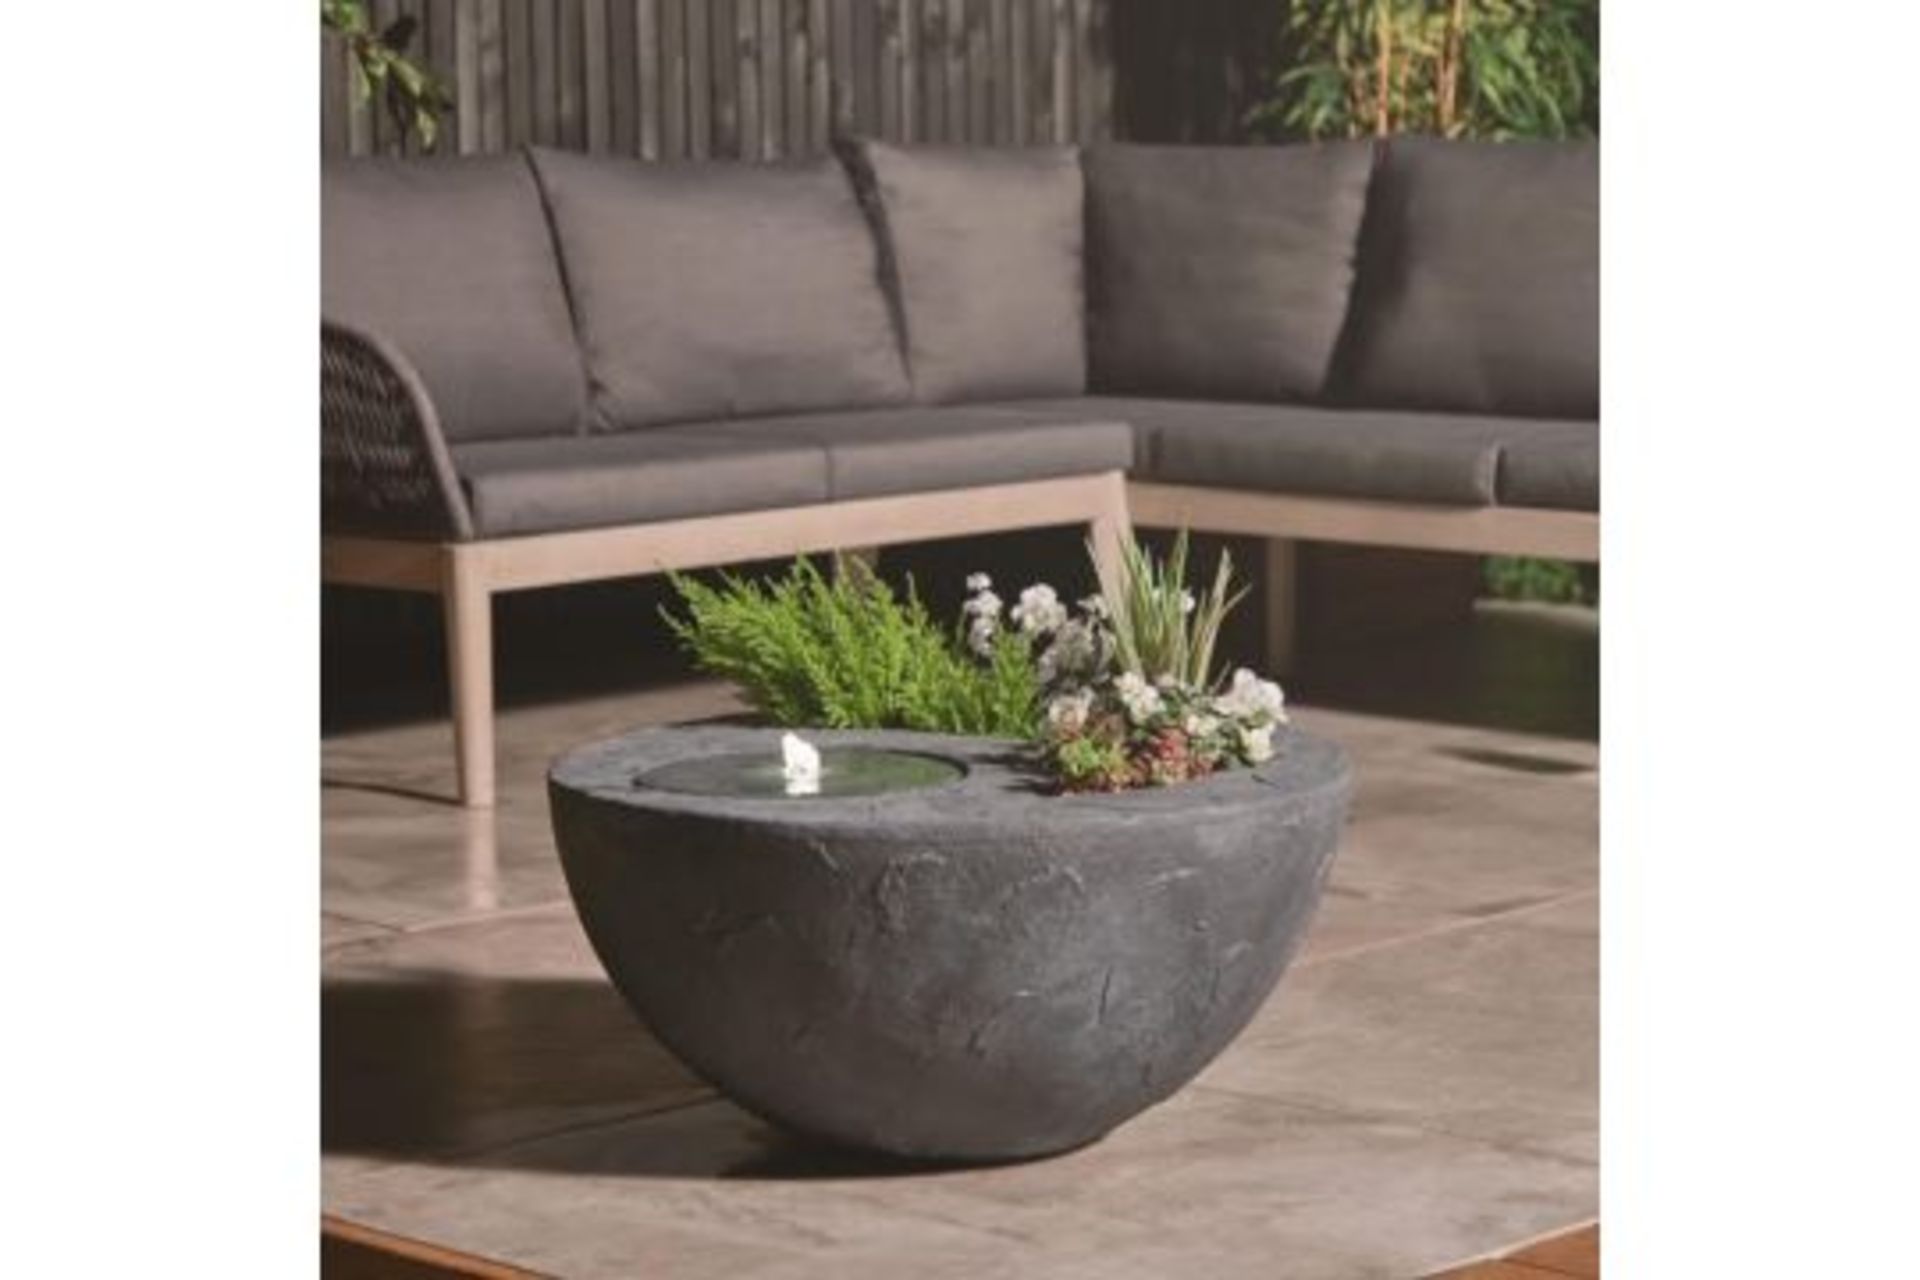 New & Boxed Dual Water Feature and Planter. RRP £299.99 (REF726) - Garden Bowl Design Planter, - Image 3 of 6